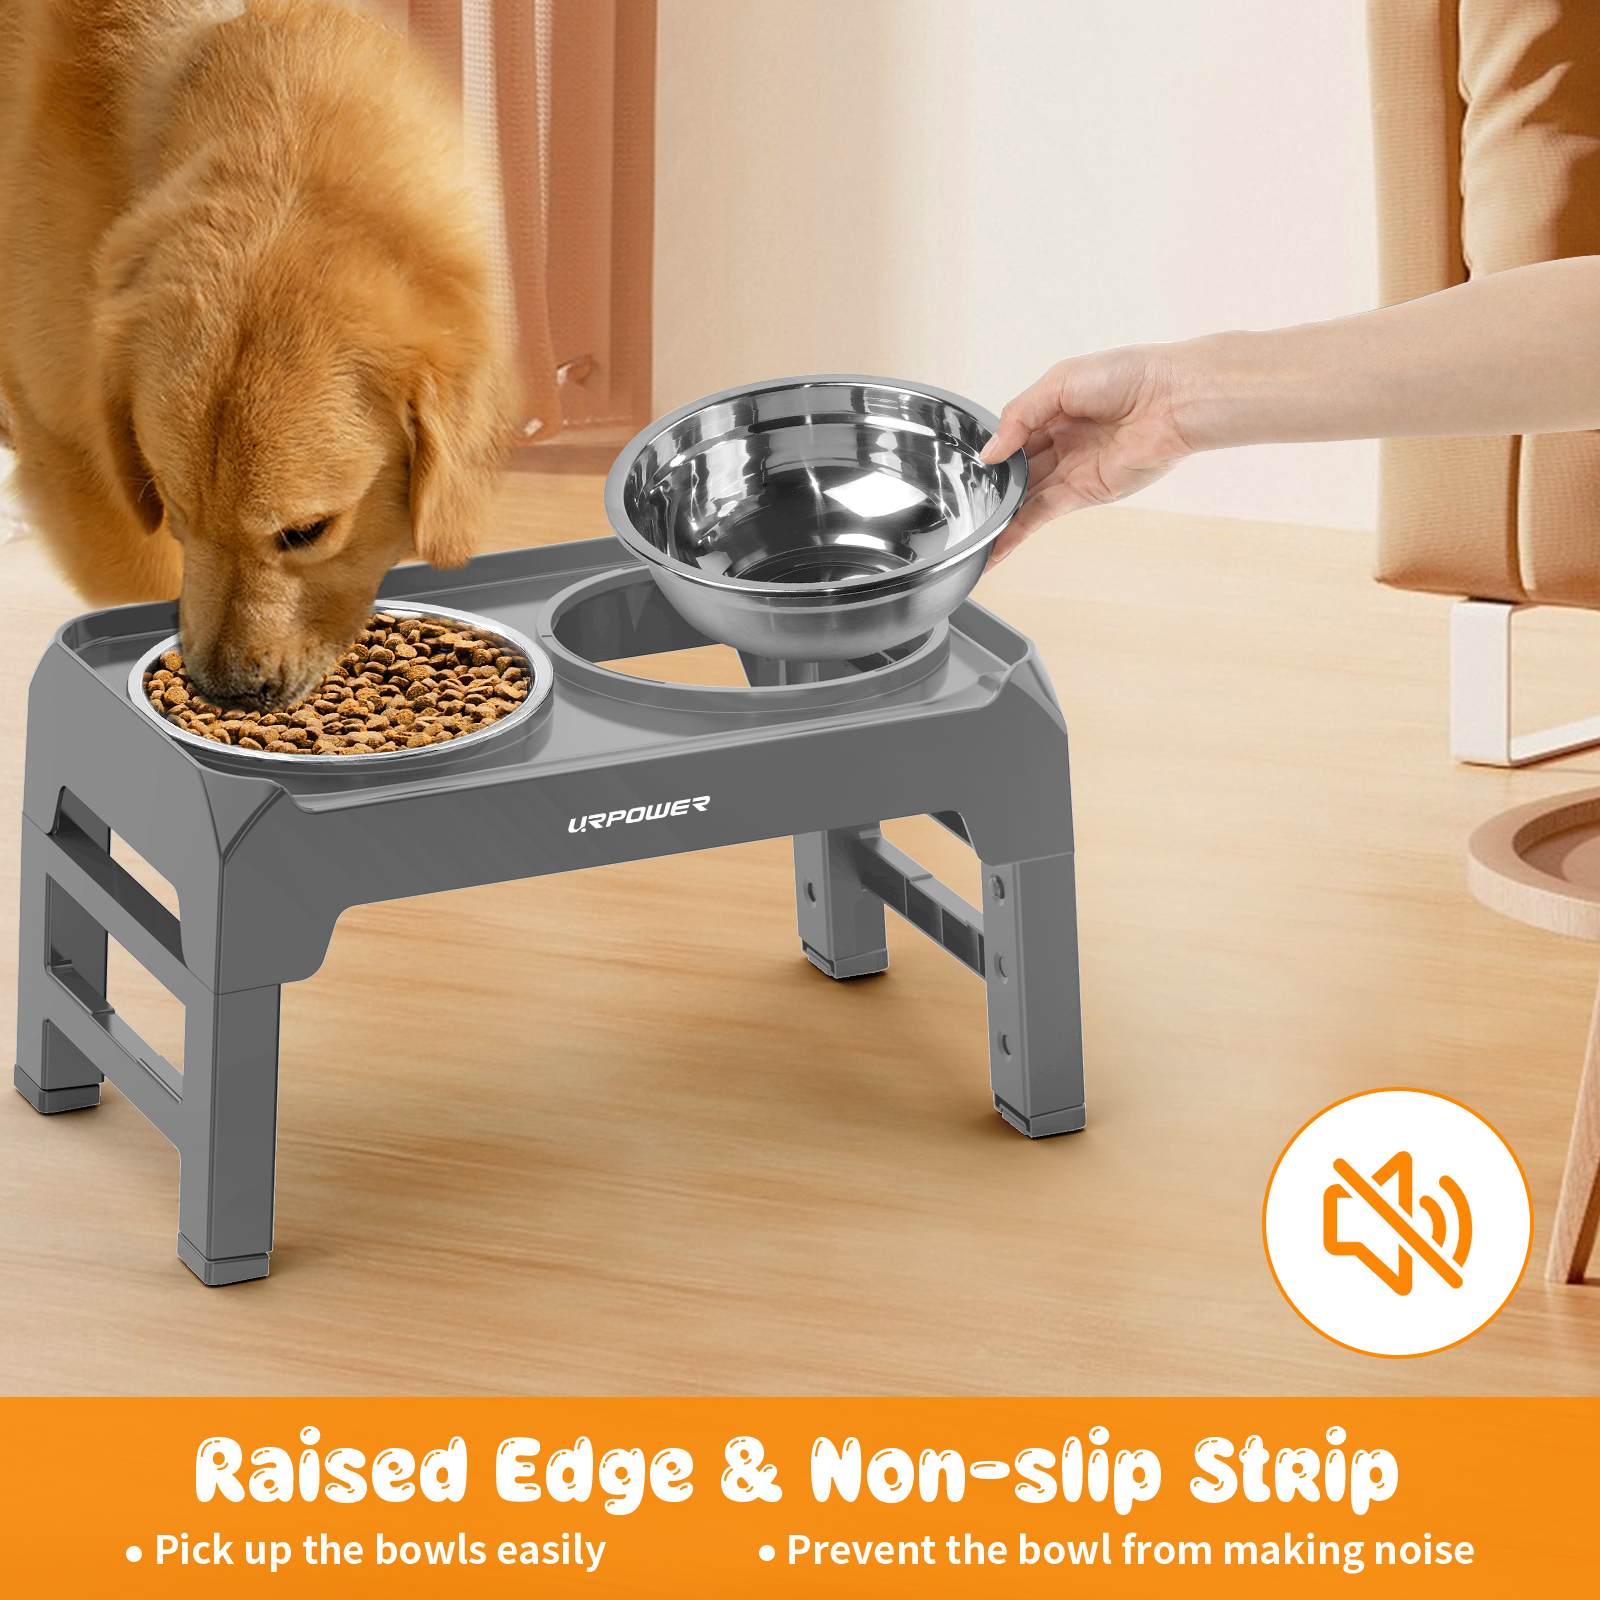 URPOWER Elevated Dog Bowls Adjustable Raised Dog Bowl with 2 Stainless Steel 1.5L Dog Food Bowls Stand Non-Slip No Spill Dog Dish Adjusts to 3 Heights 2.8”, 8”, 12”for Small Medium Large Dogs and Pets